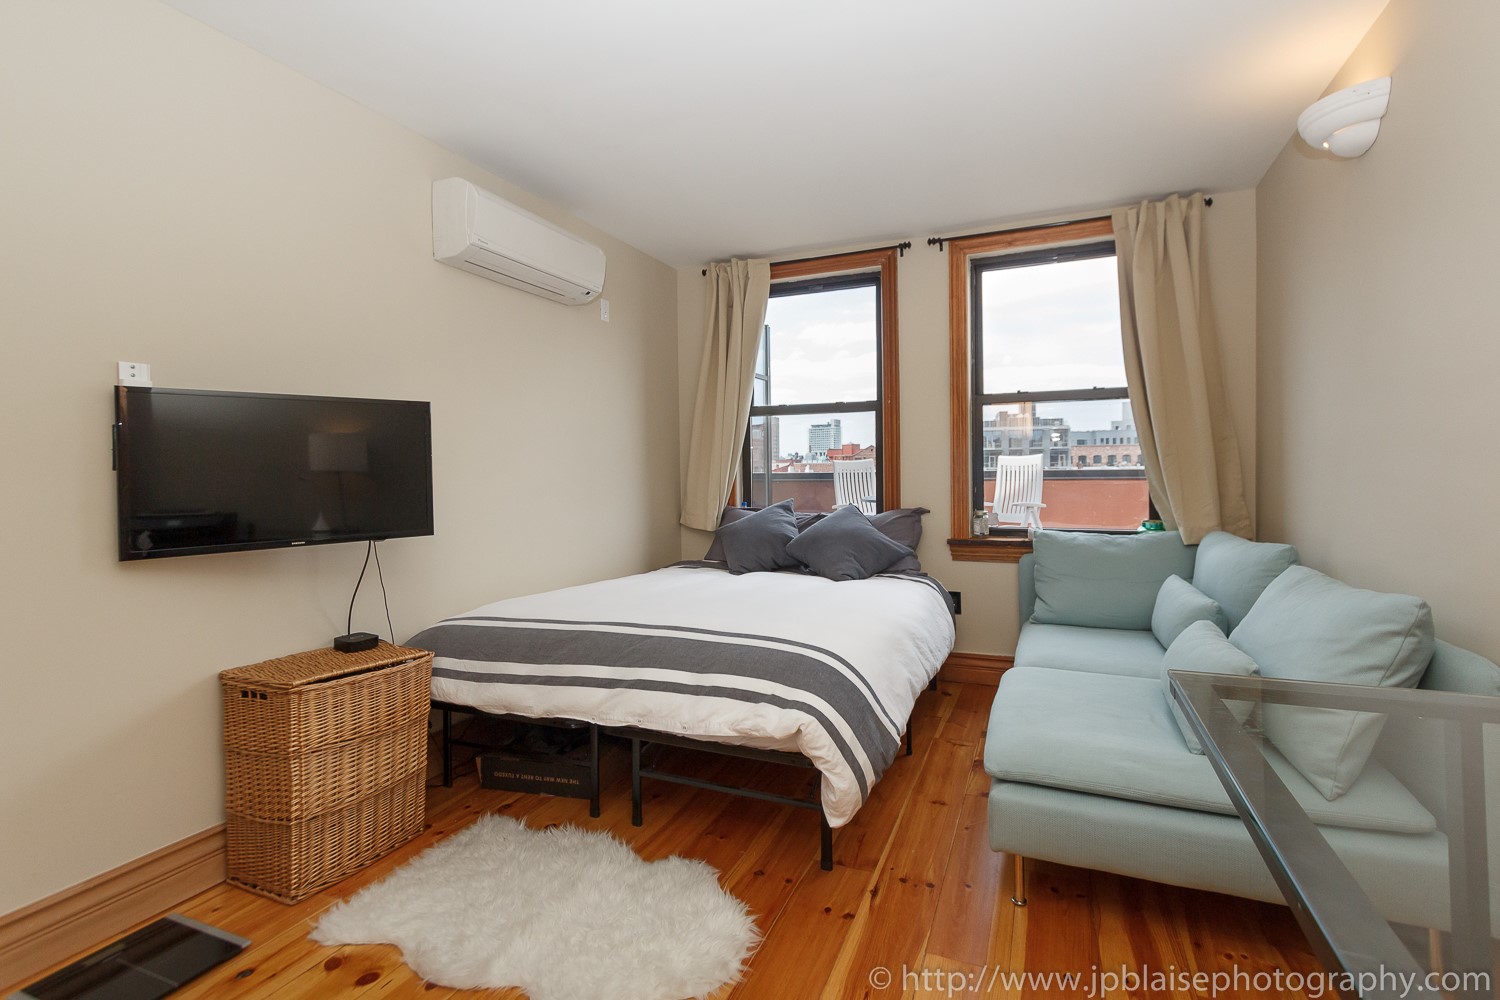 Bedroom to rent in williamsburg apartment brooklyn photography